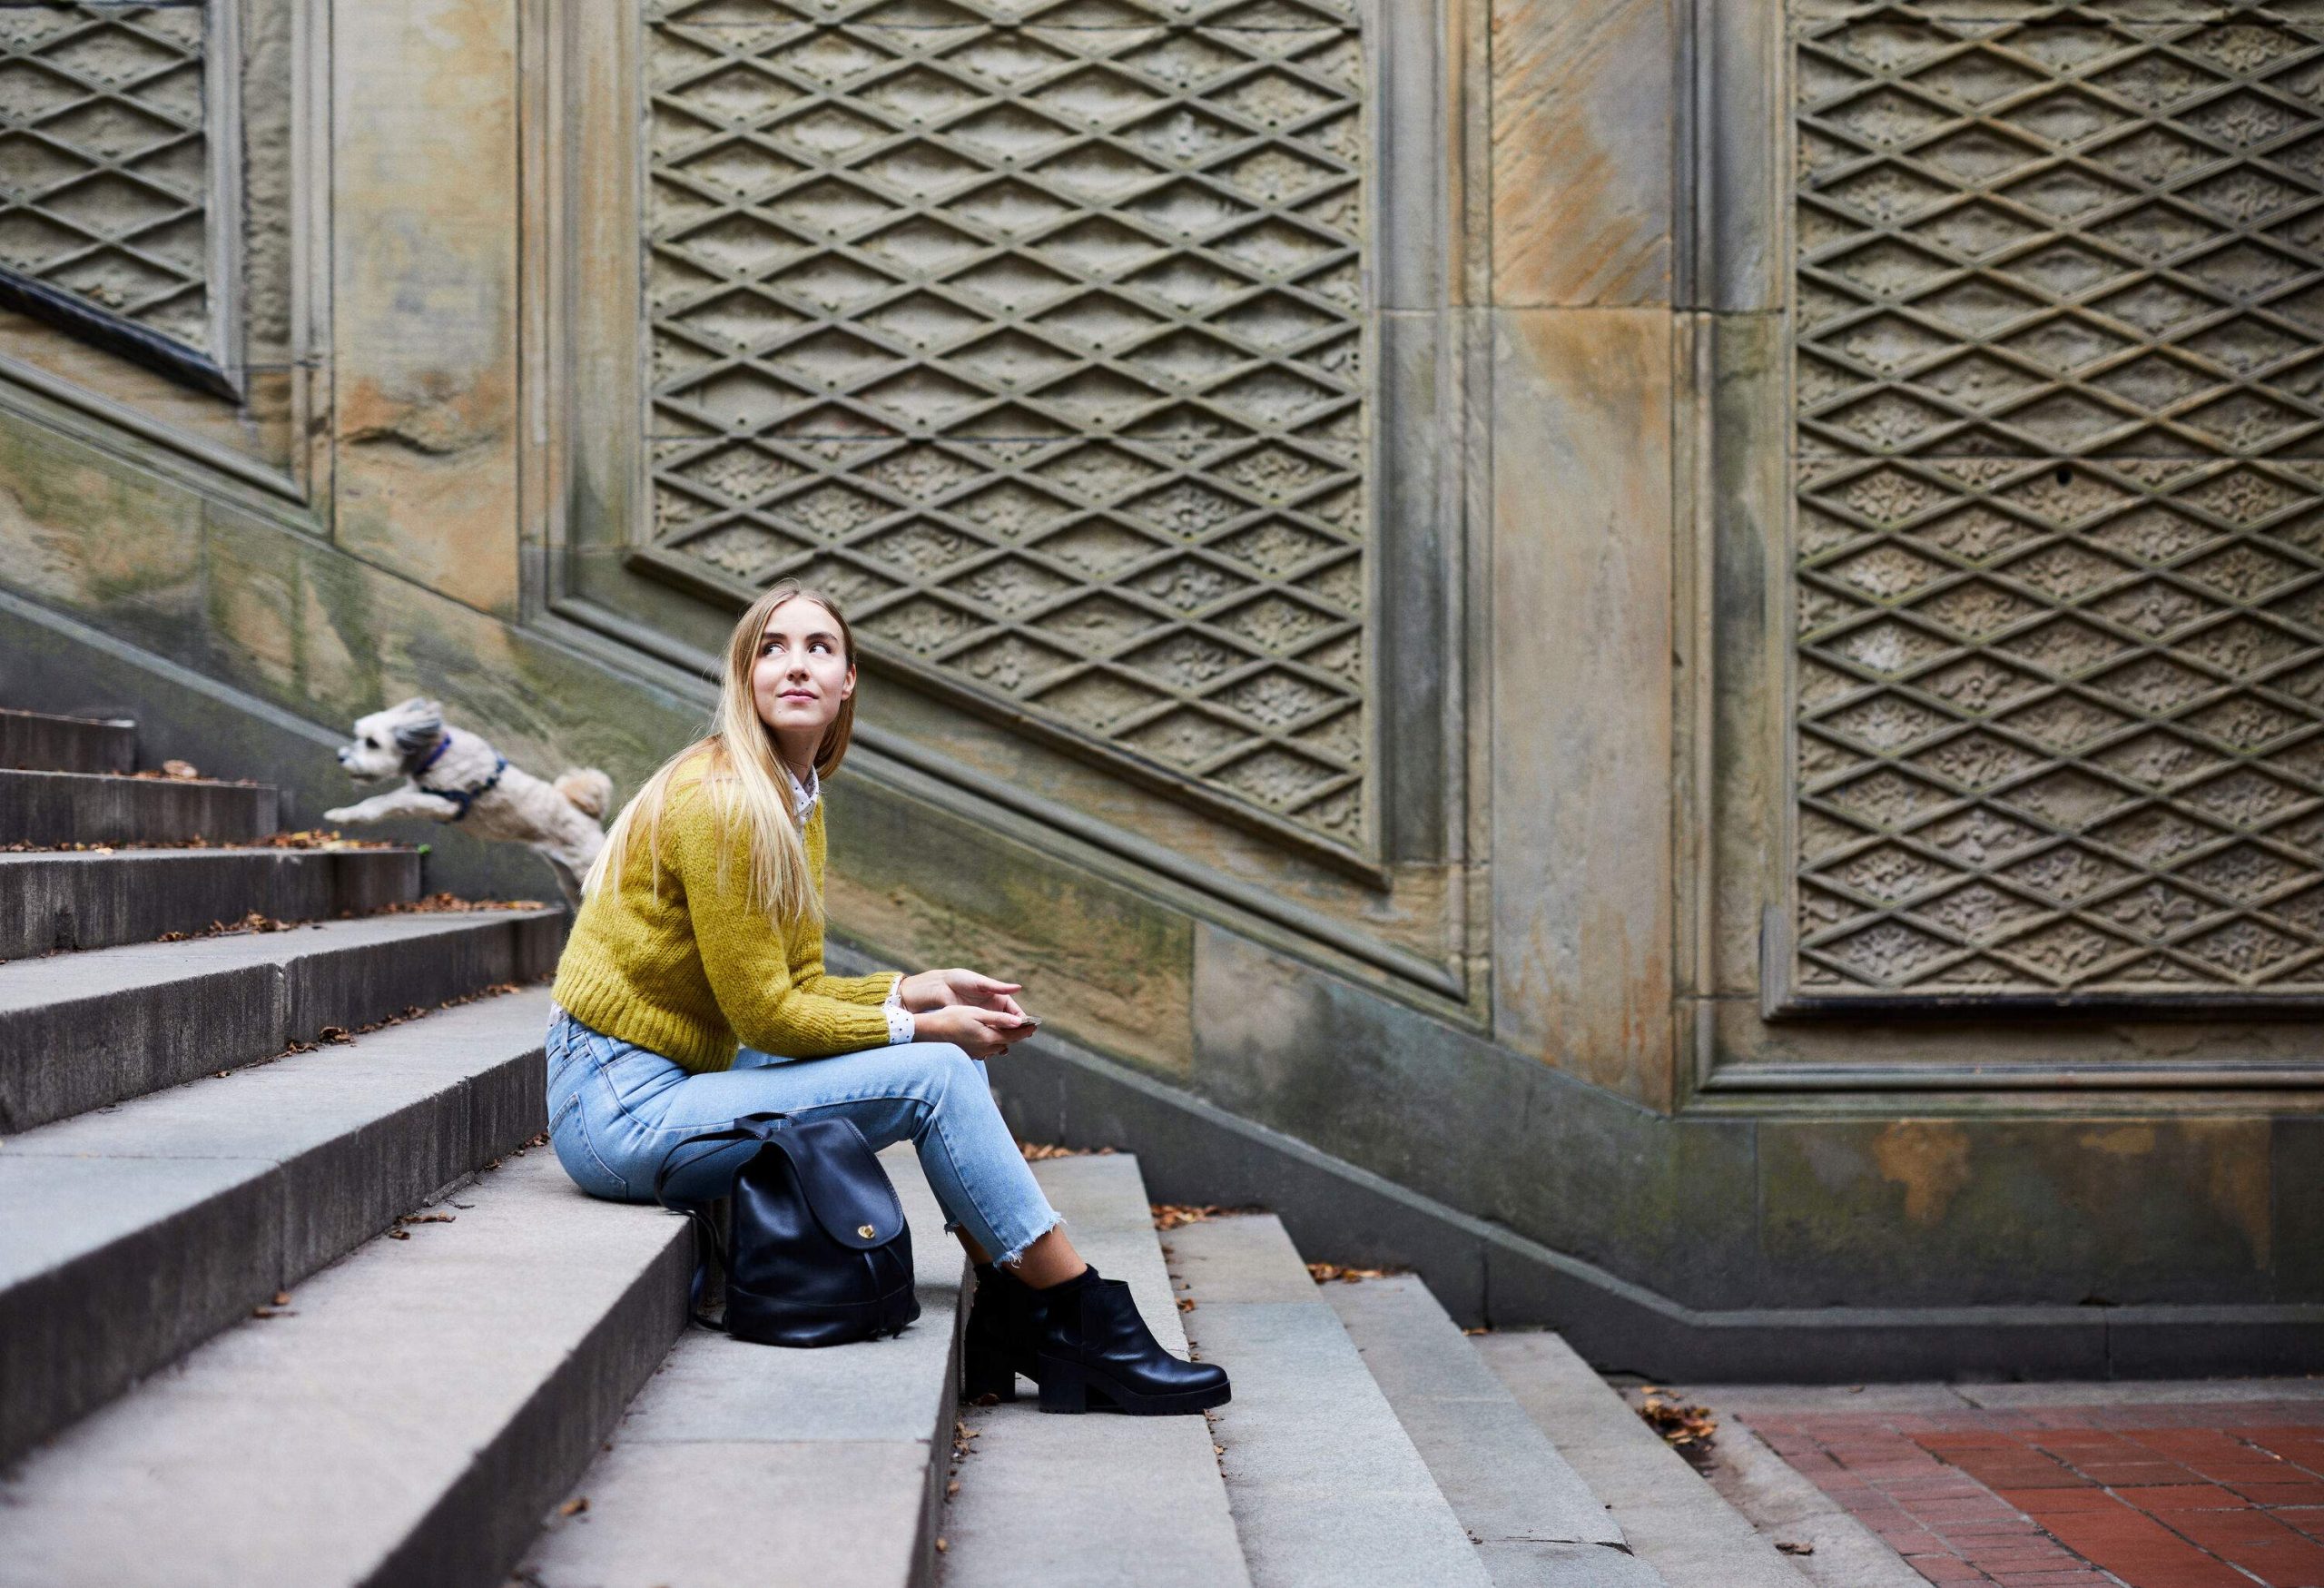 A woman sits on stone steps with a running dog behind her.